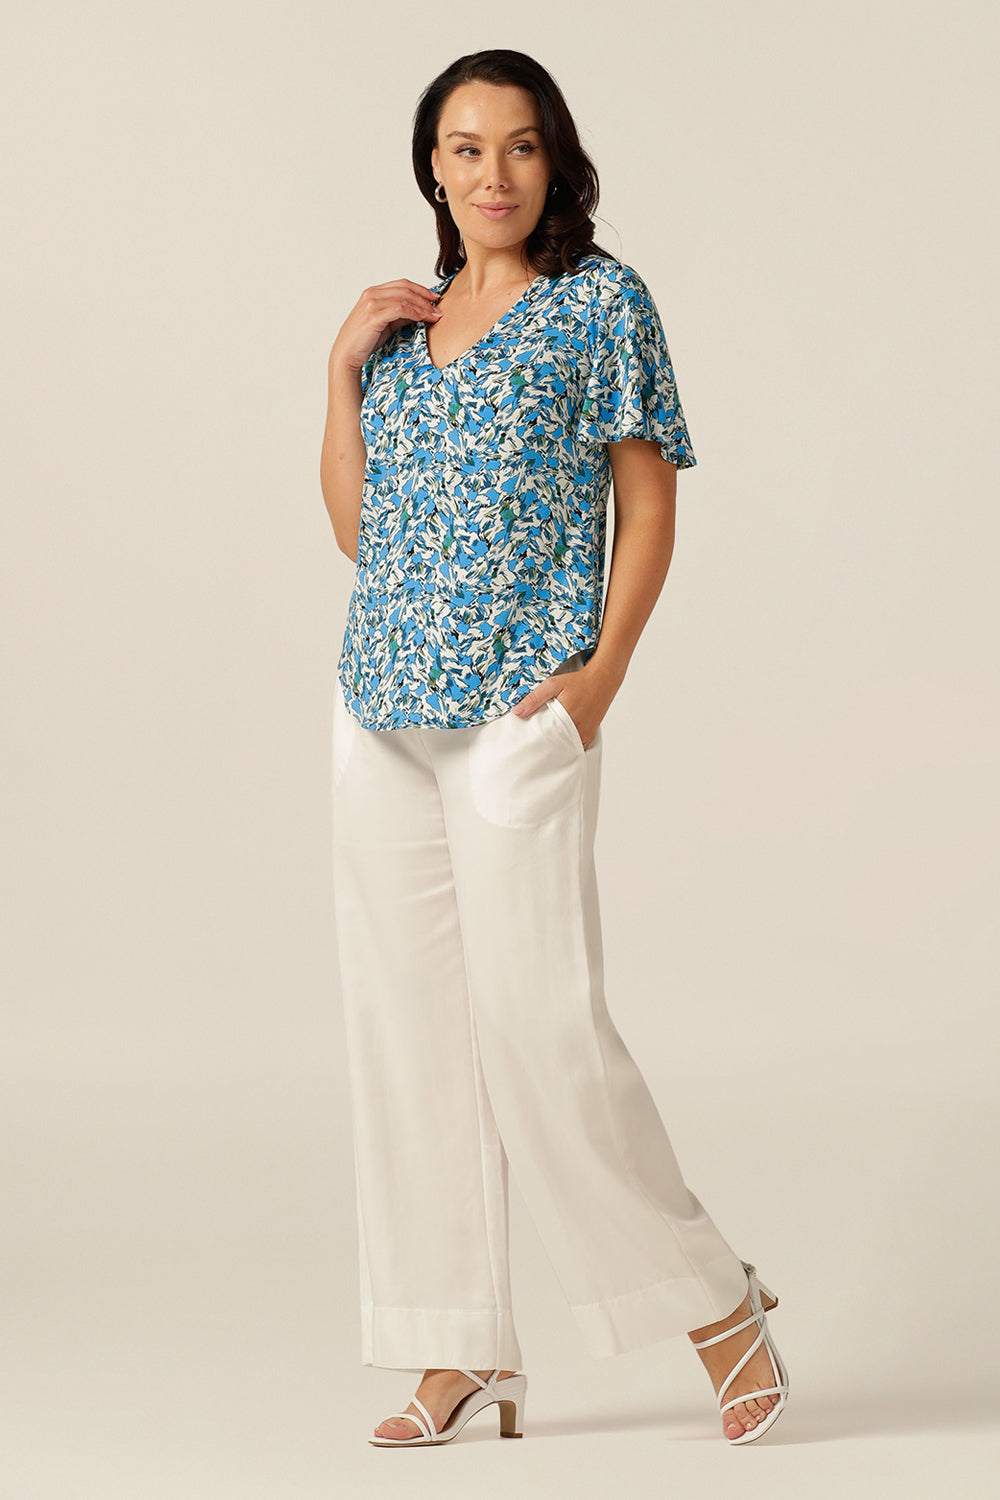 V-neck jersey top with flutter sleeves, made in Australia